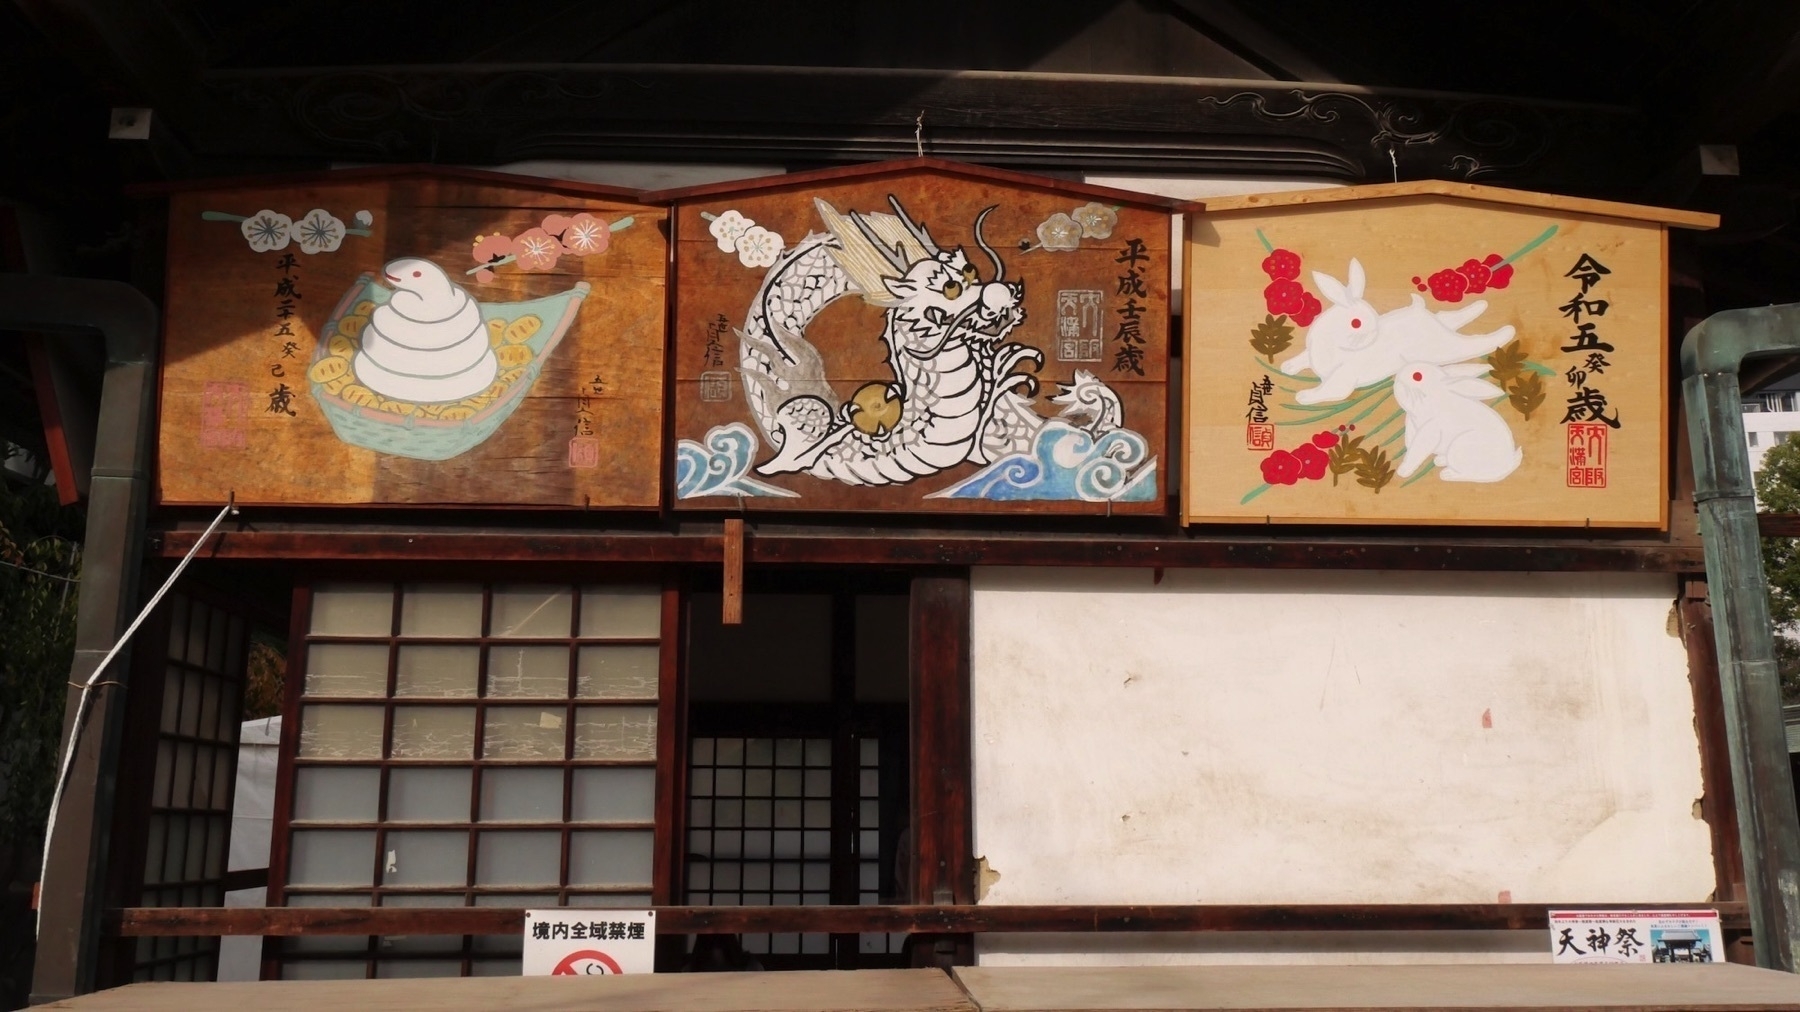 Large paintings of three zodiac animals with the associated year above a shrine window. From right to left: Rabbit - Reiwa 5; Dragon Heisei - 24; Snake - Heisei 25. 